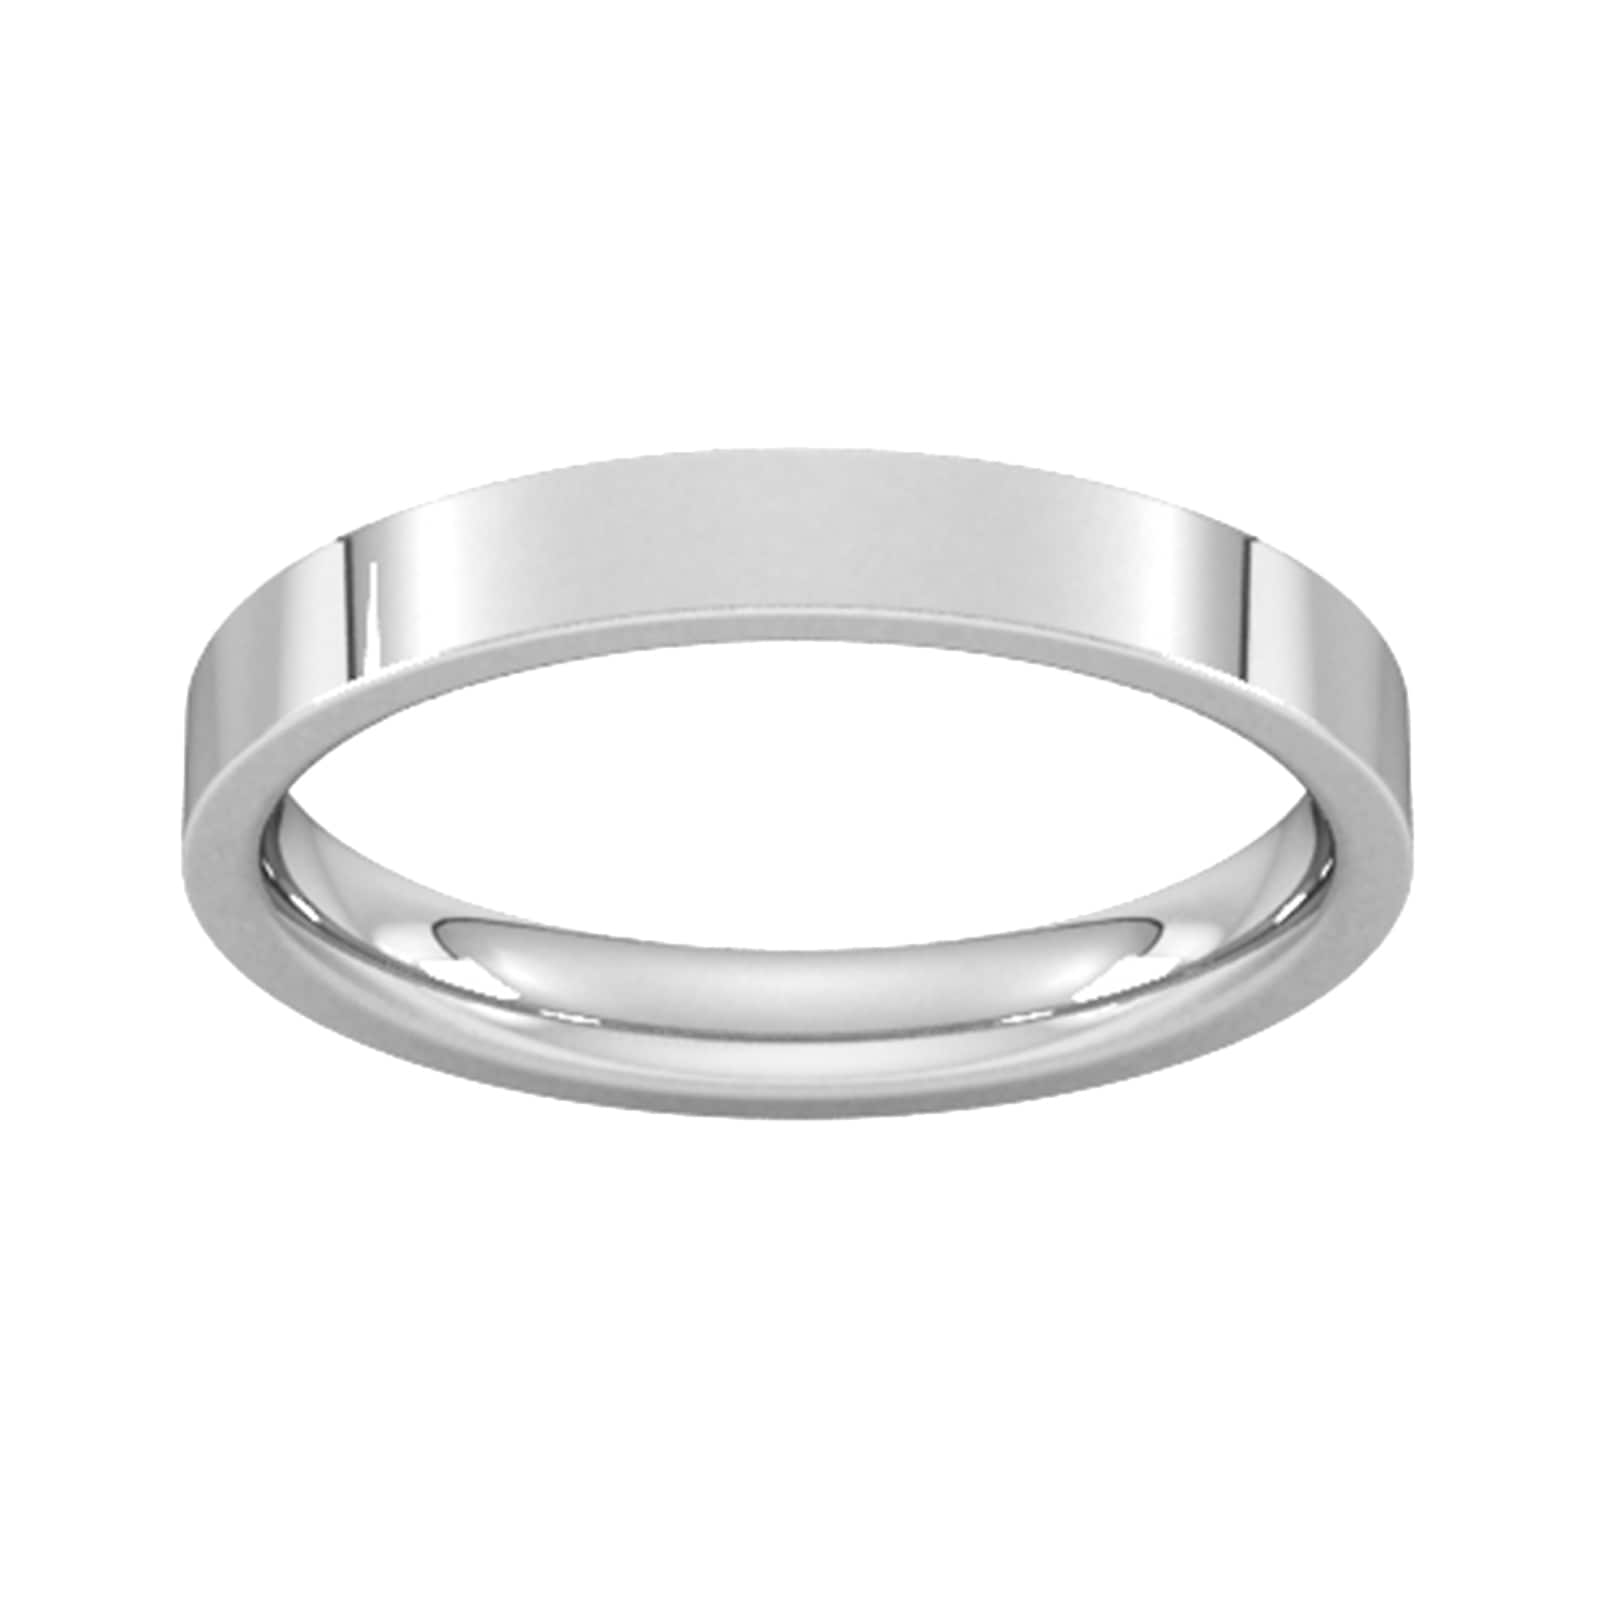 3mm Flat Court Heavy Wedding Ring In 9 Carat White Gold - Ring Size J